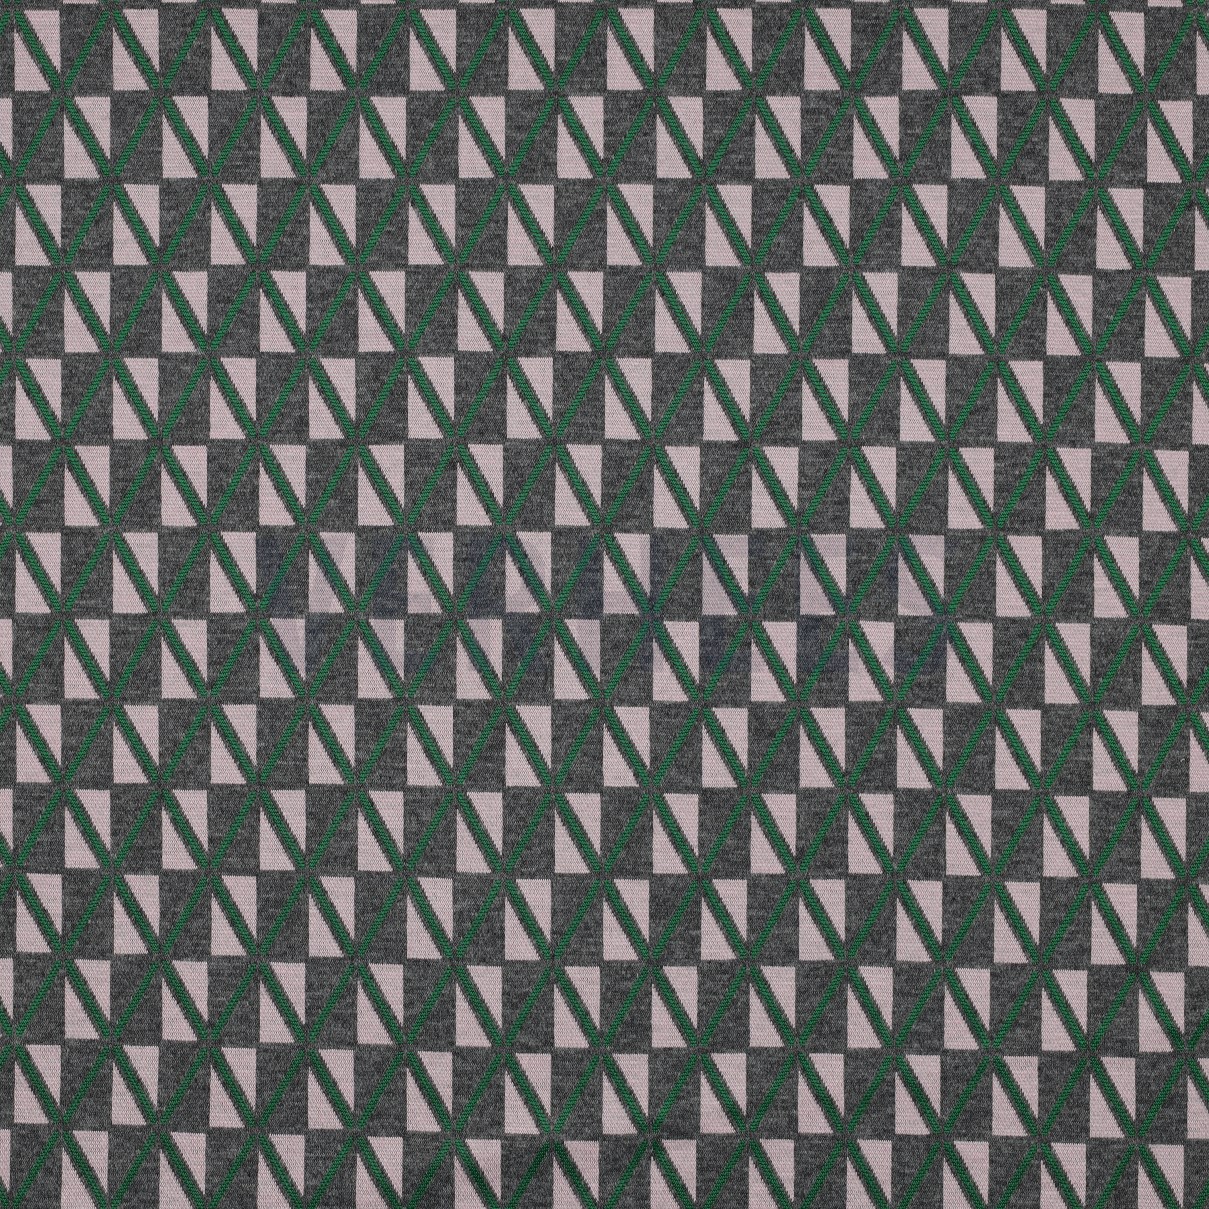 KNITTED JACQUARD GRAPHIC GREEN (high resolution)